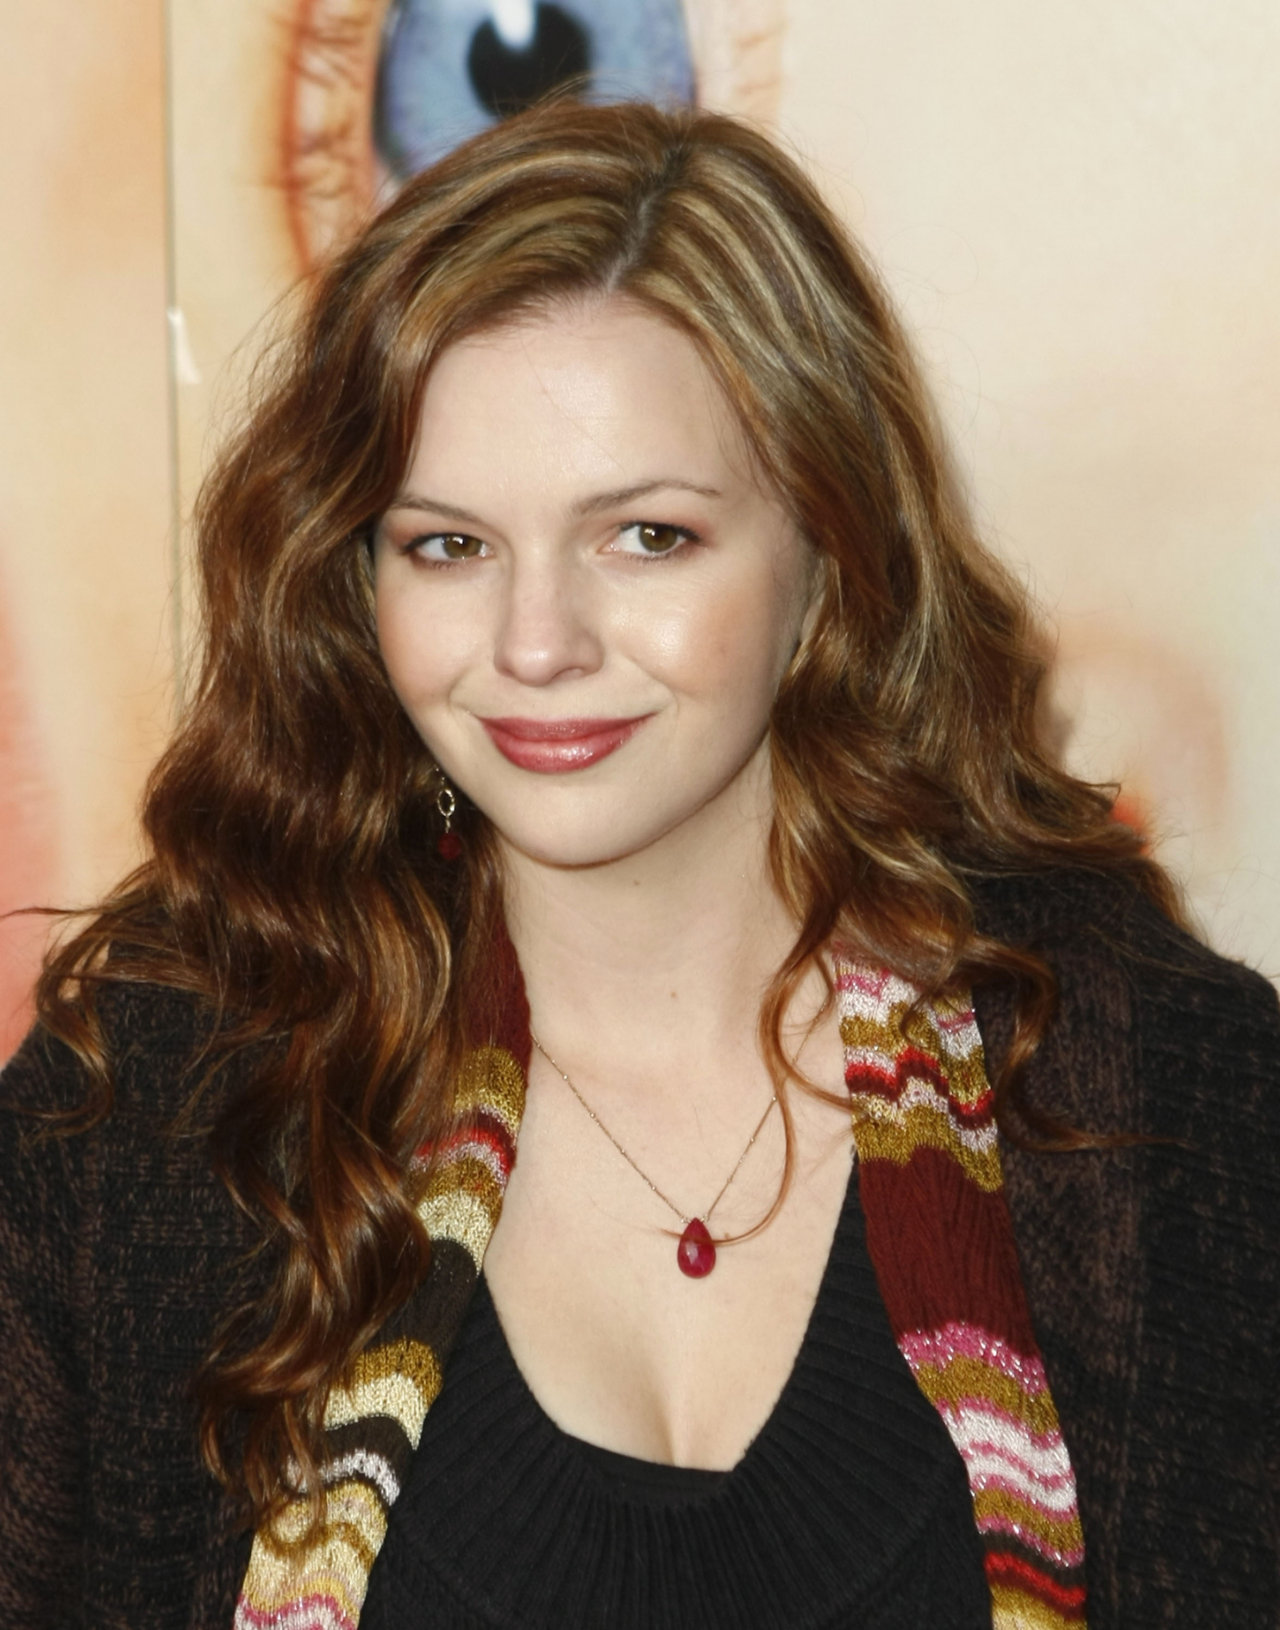 Hot TV Babe Of The Week.Amber Tamblyn.